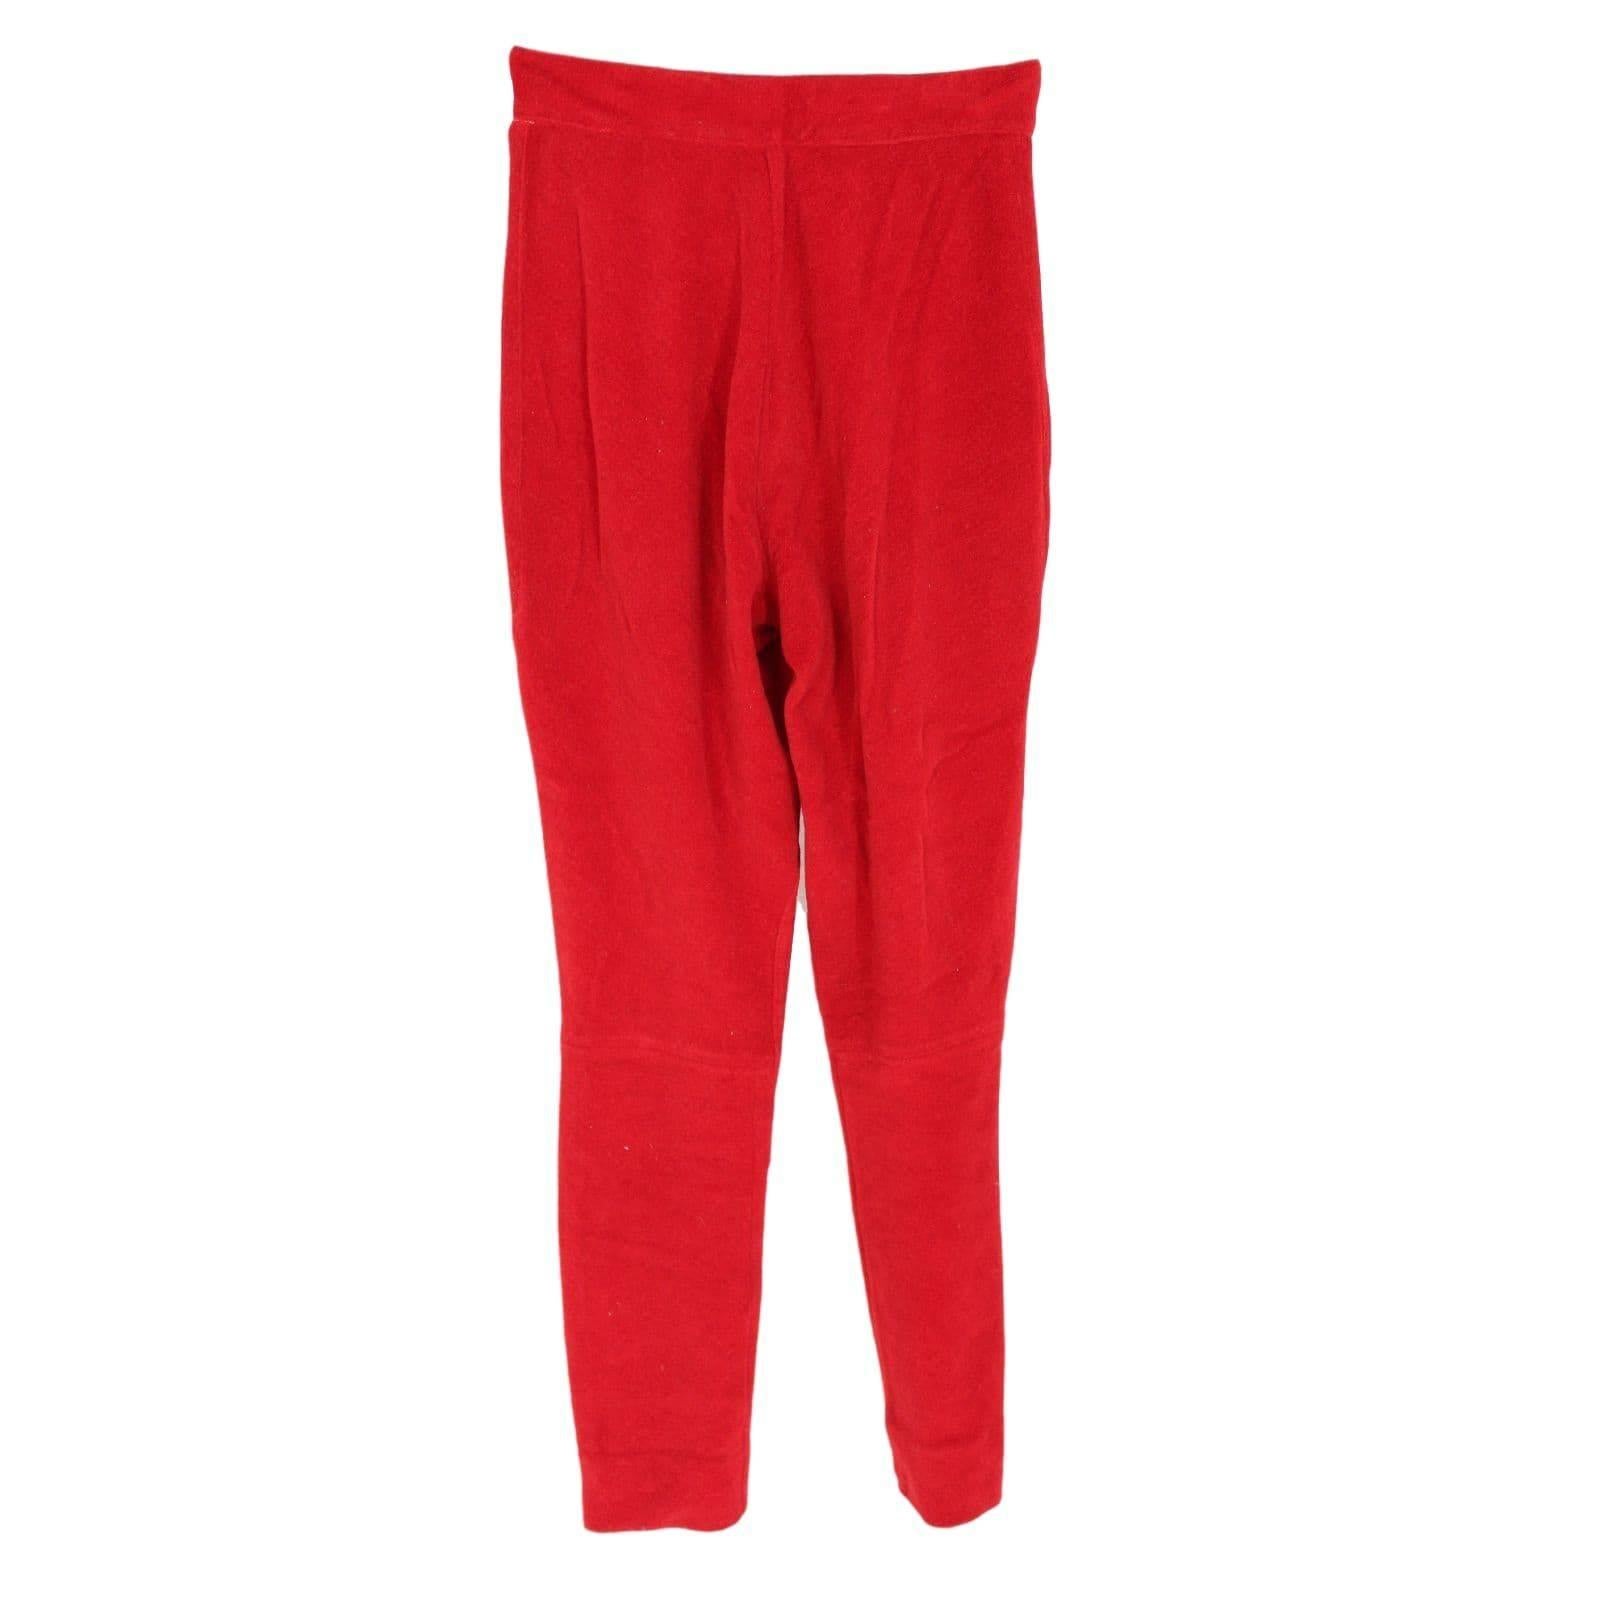 Red Vivienne Westwood cupro red pants trousers size 42 1990s women's vintage